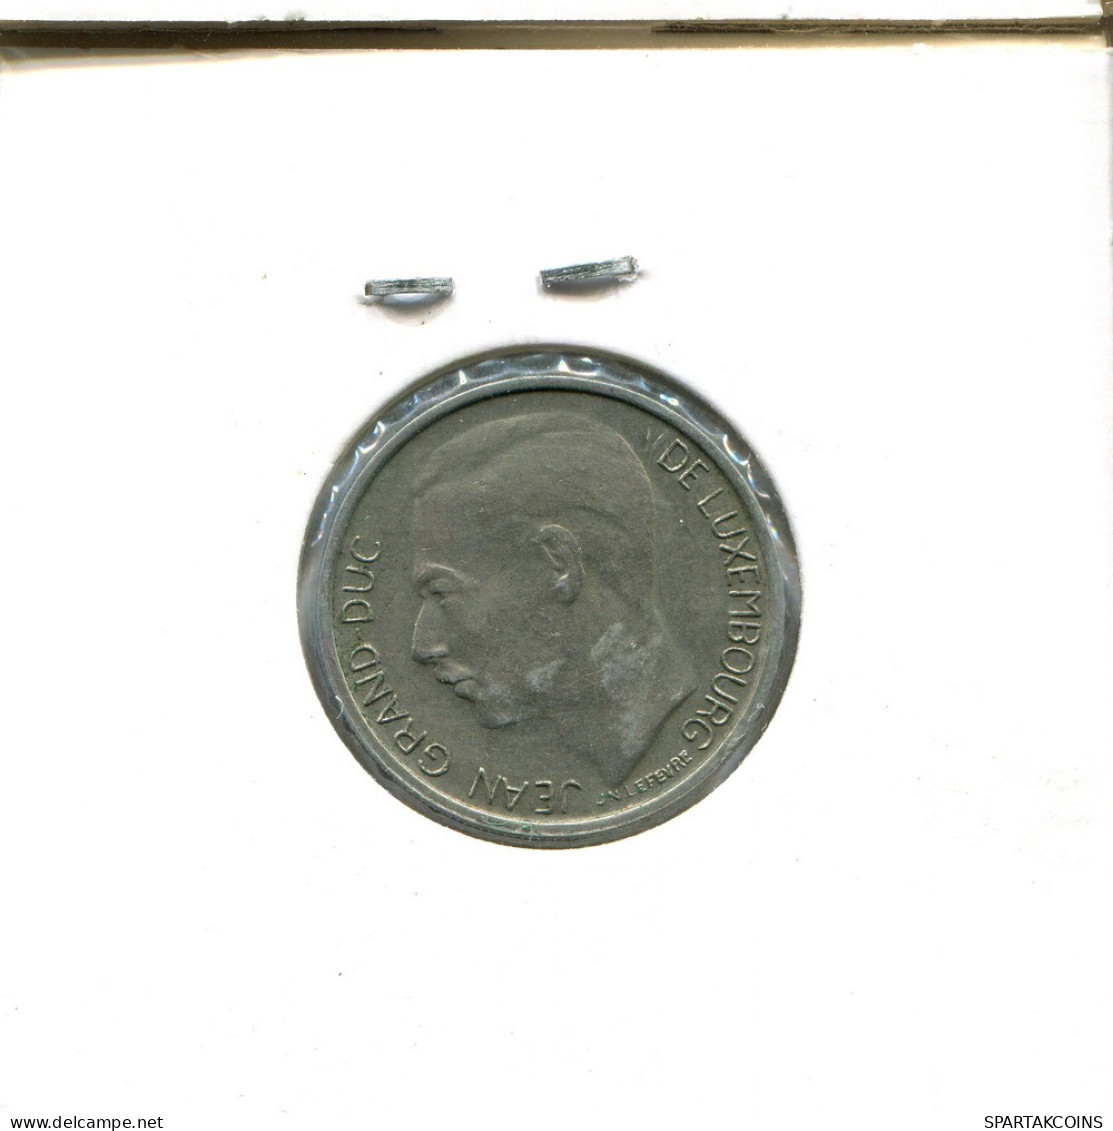 1 FRANC 1966 LUXEMBURG LUXEMBOURG Münze #AT207.D.A - Luxemburg